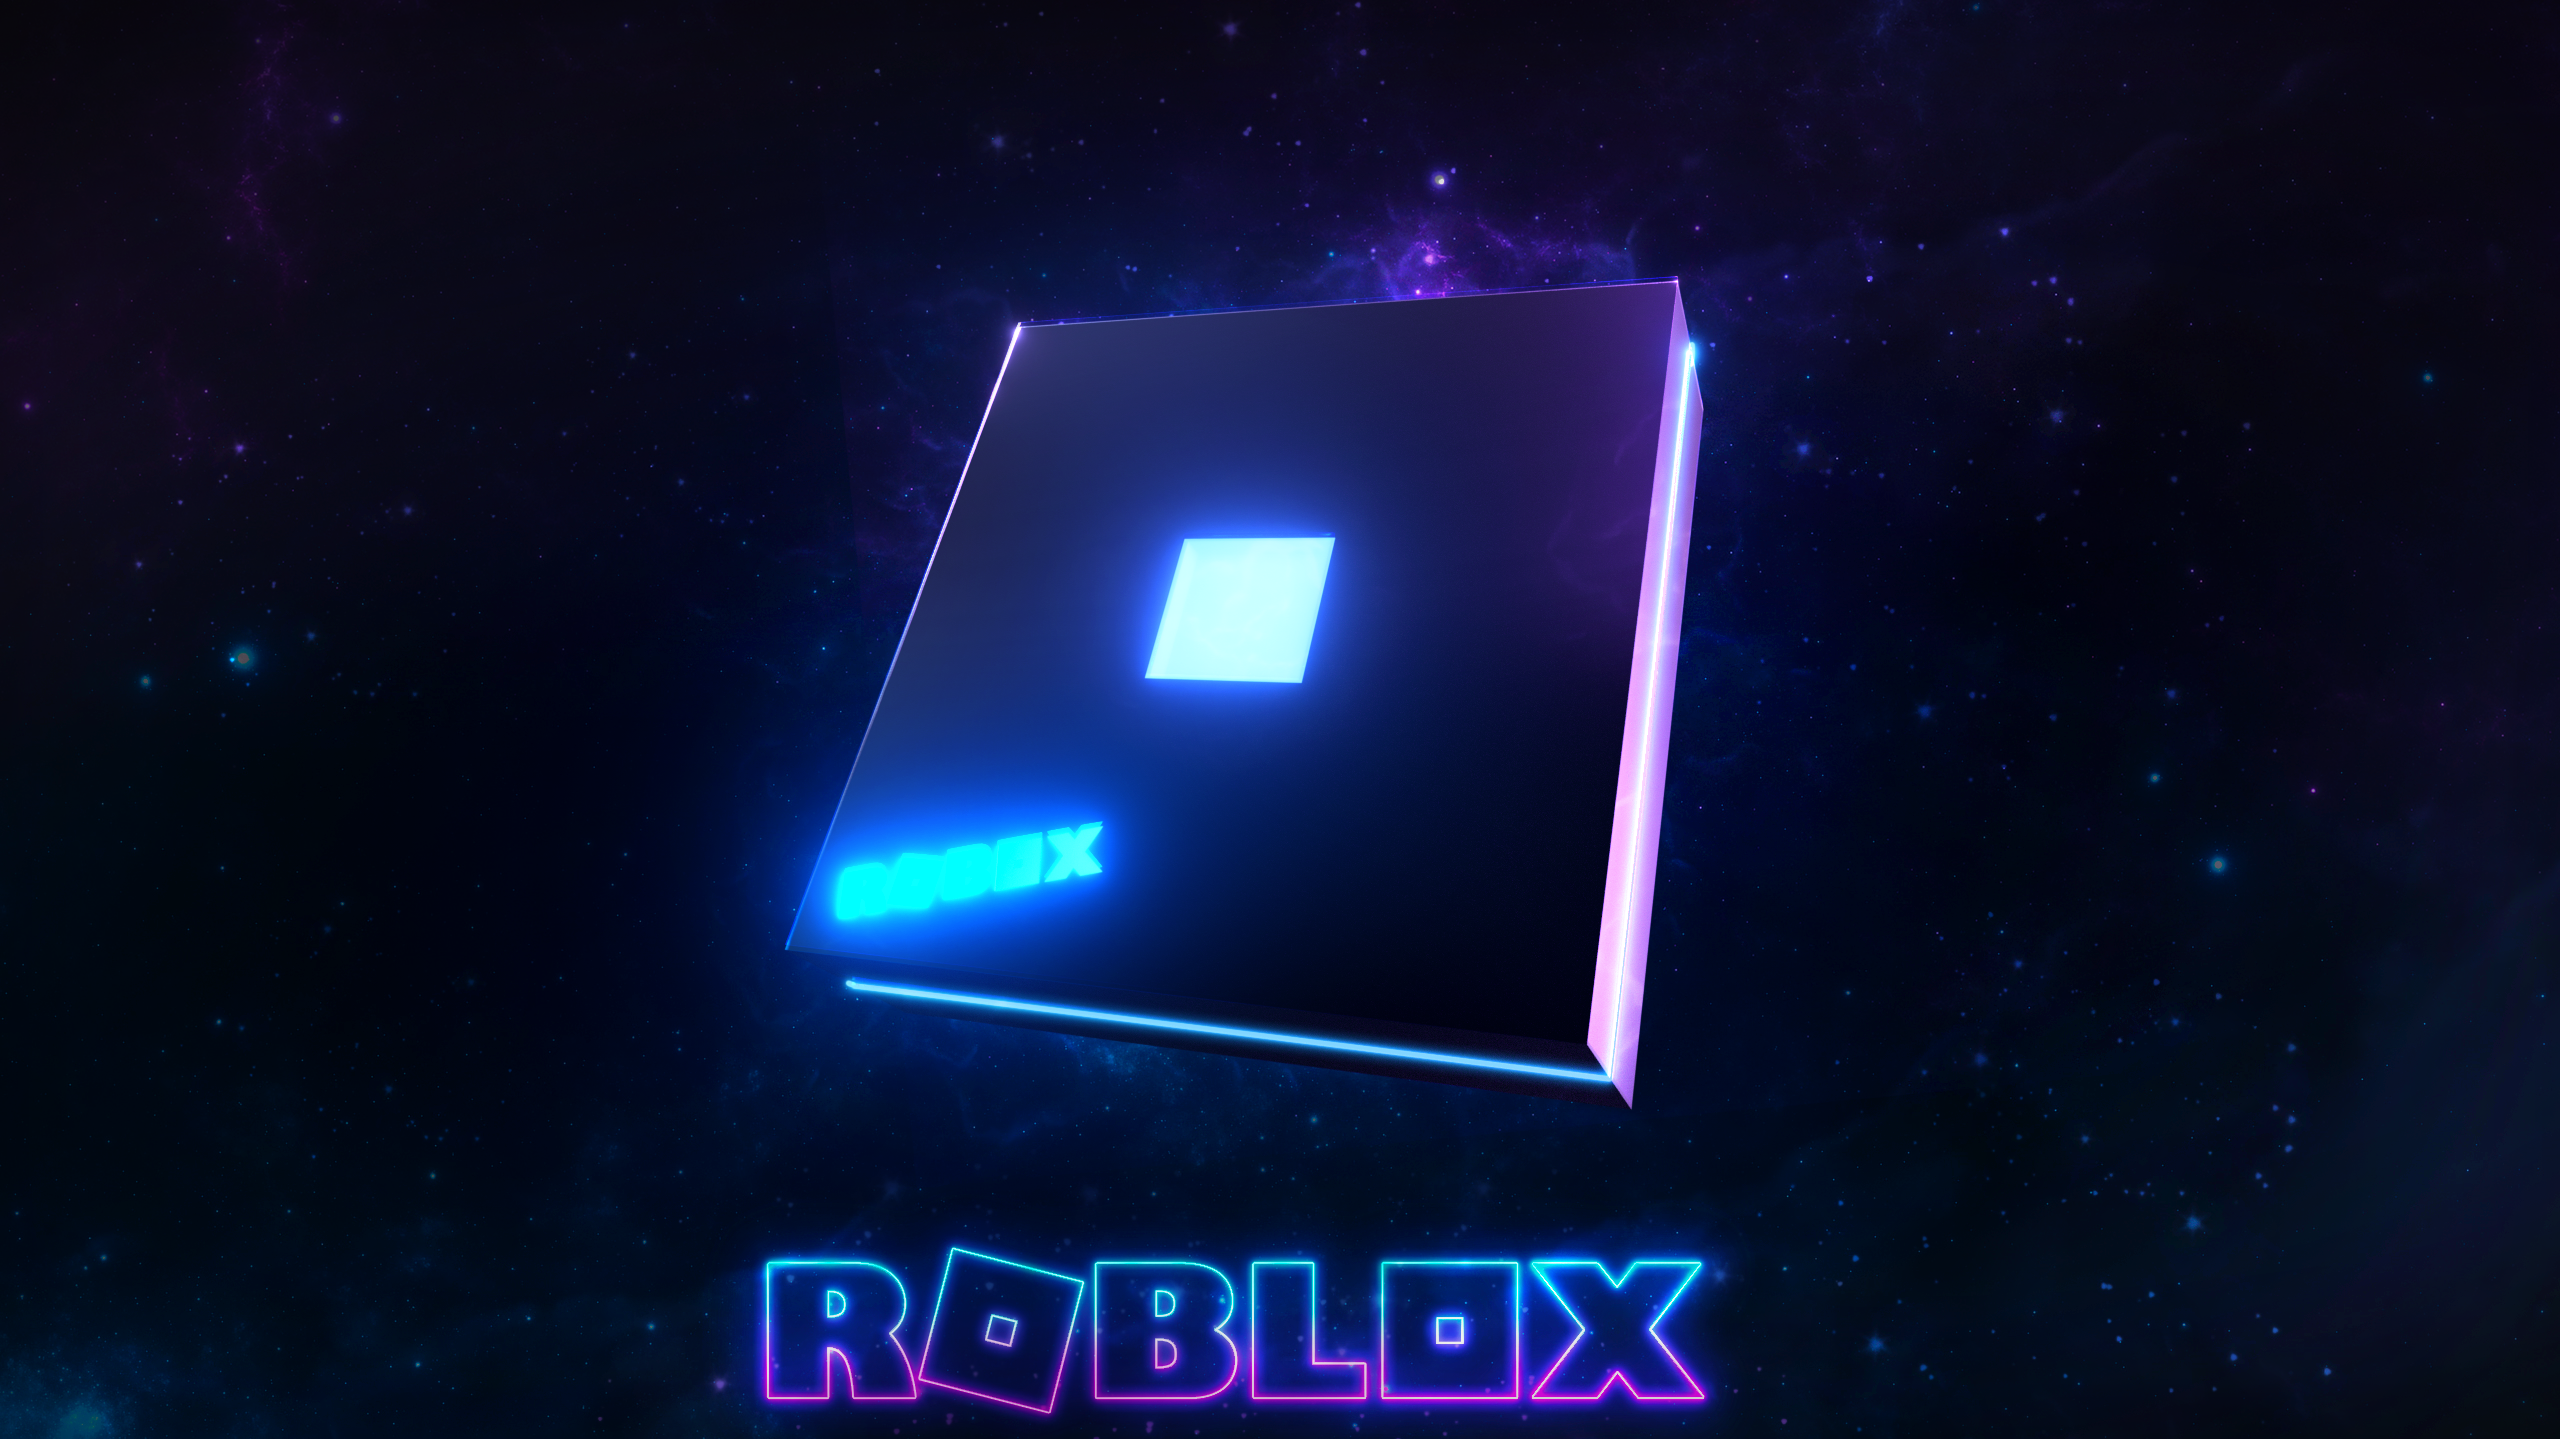 I5k On X Made A New Roblox Wallpaper Let Me Know What You Think